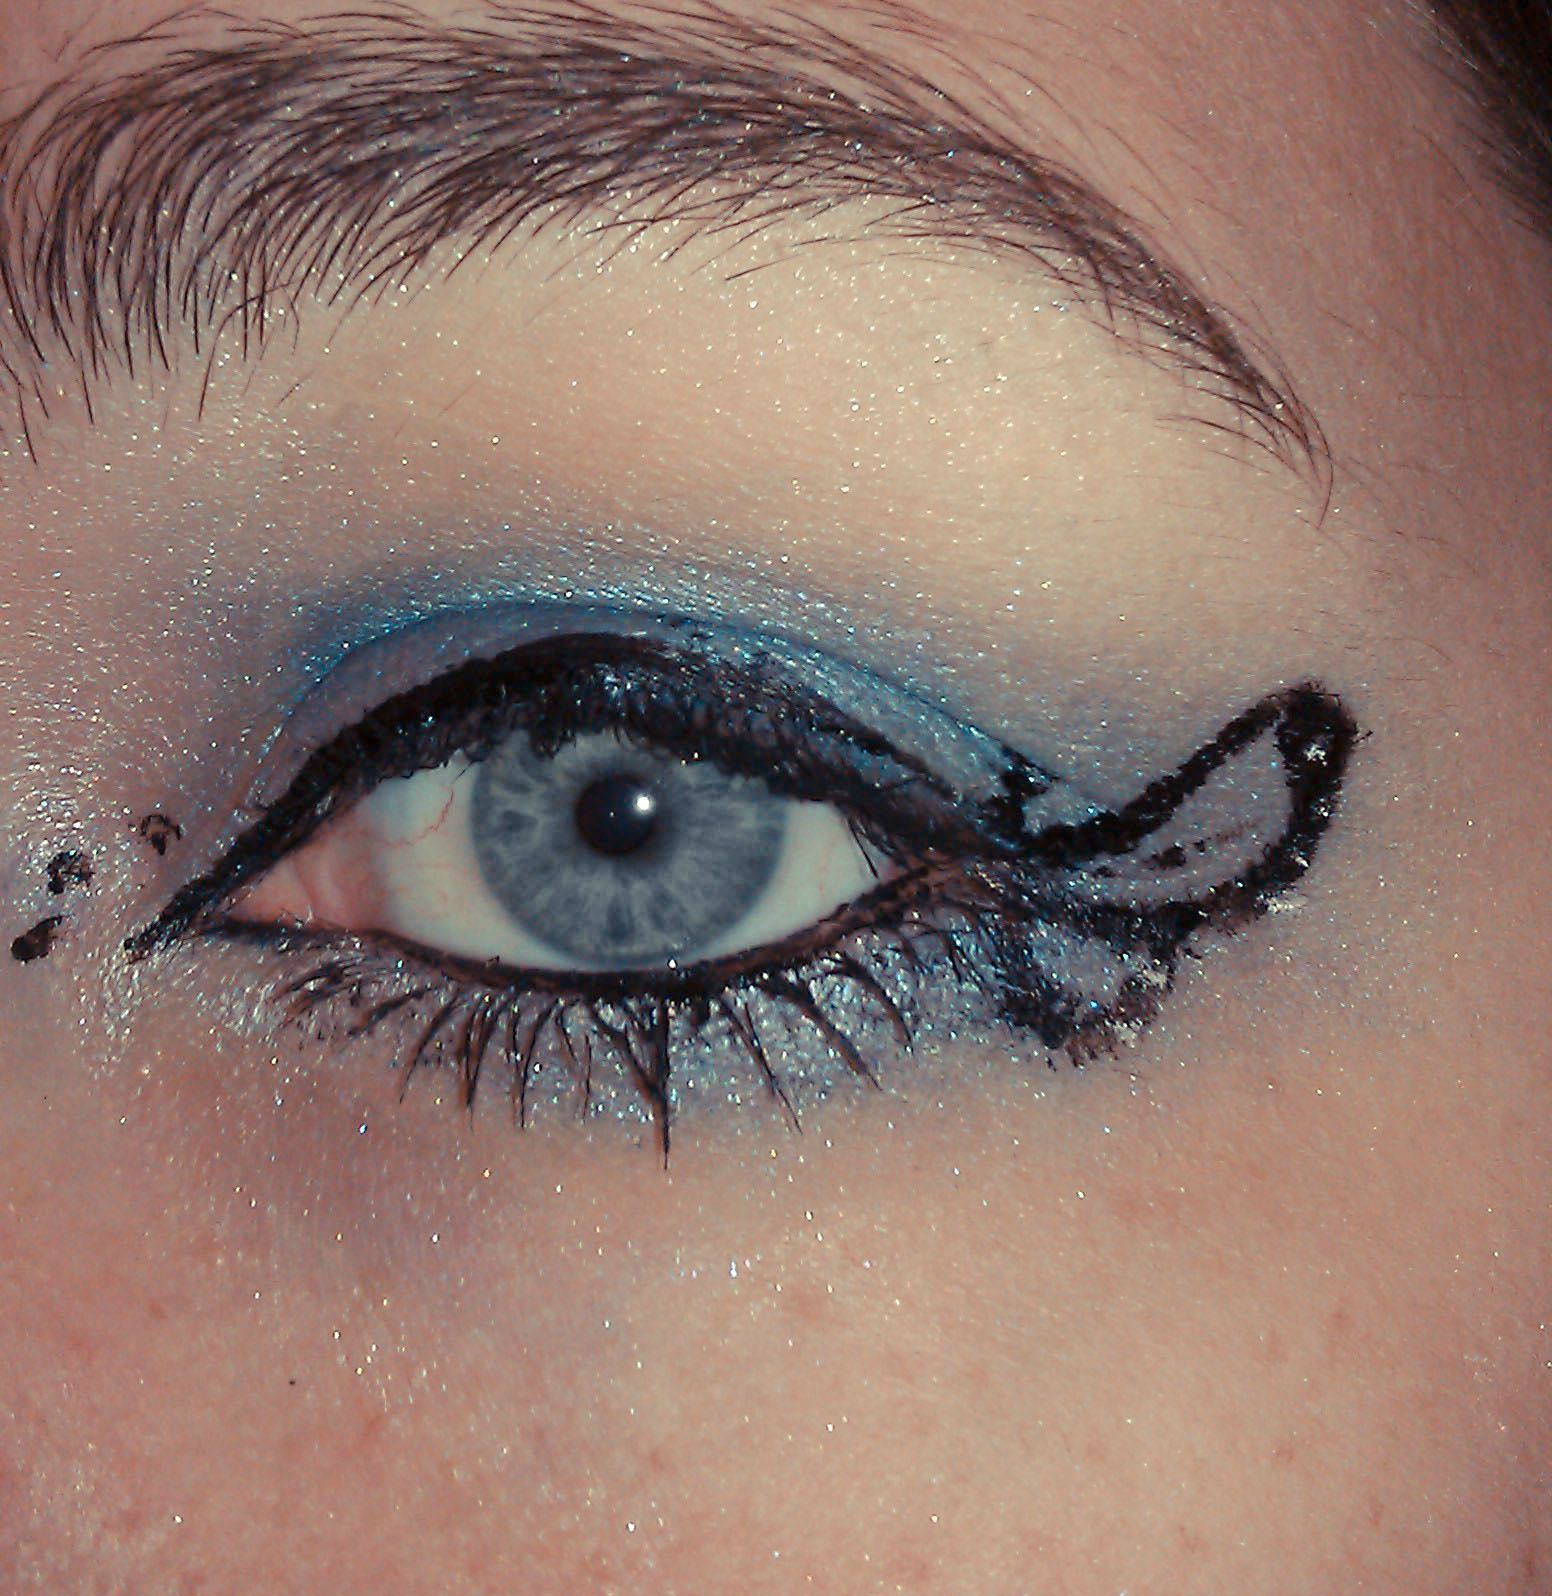 Butterfly Eye Makeup My Halloween Makeup Tips To Make It Look Better Im A Total